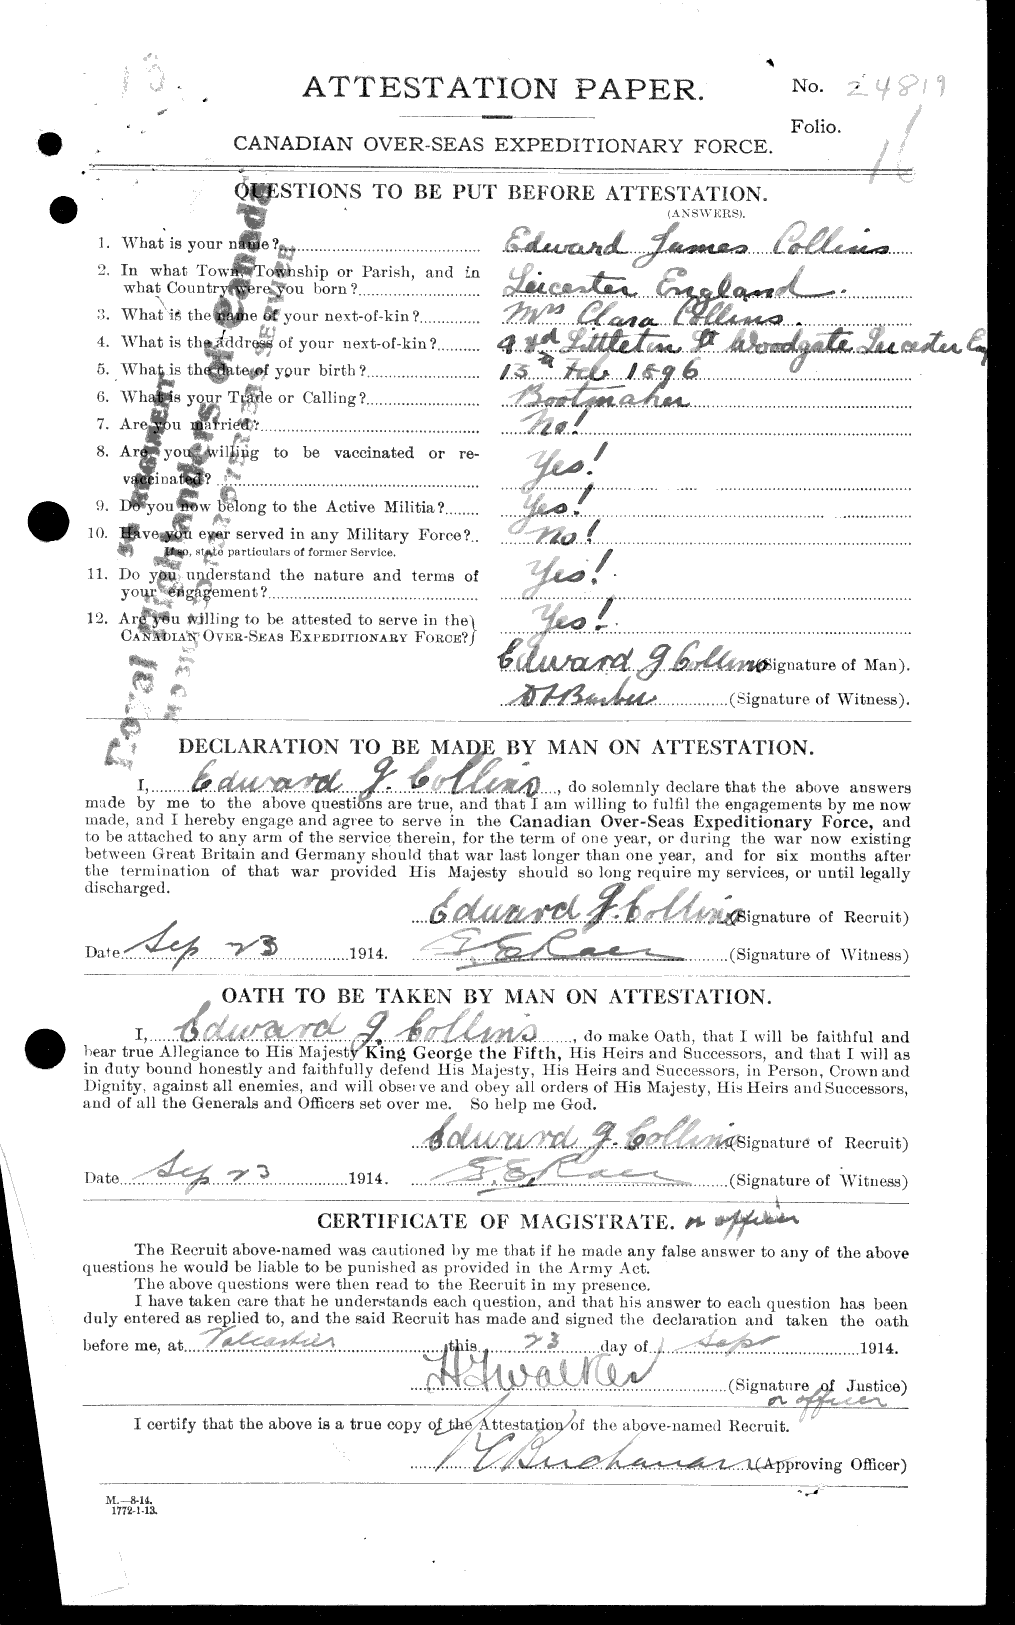 Personnel Records of the First World War - CEF 037753a